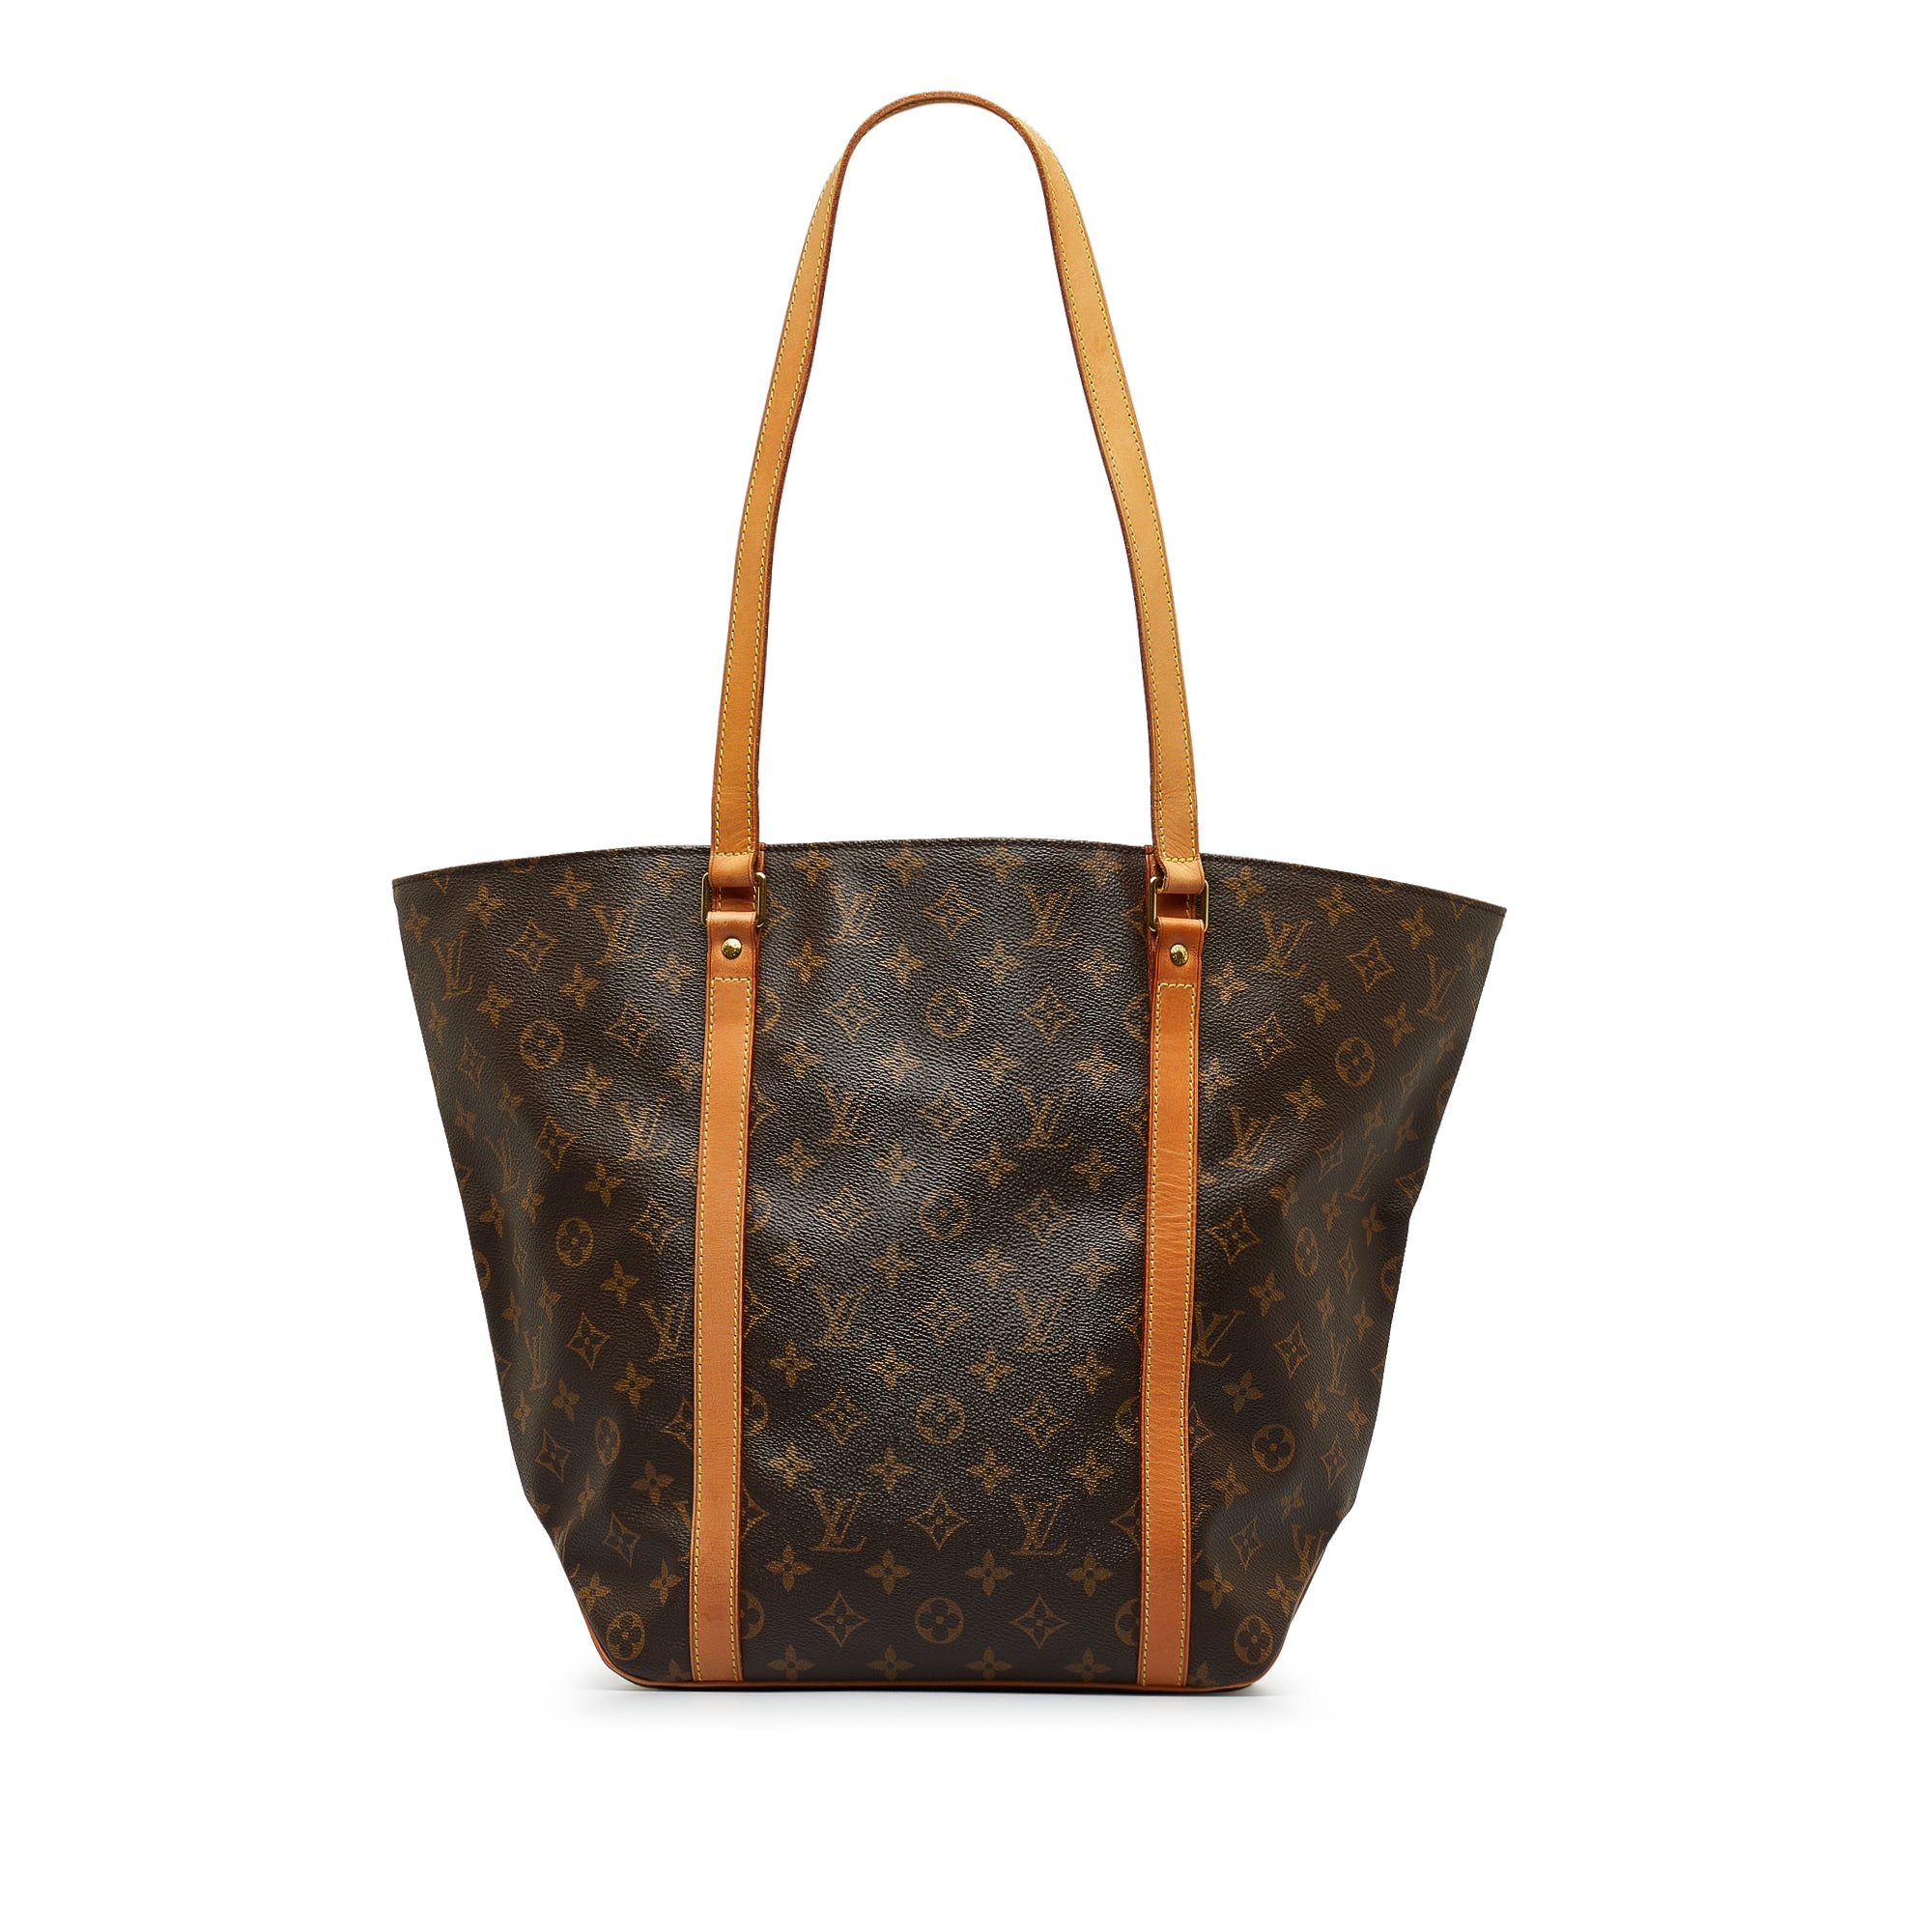 Louis Vuitton - Authenticated Shopping Bag Louboutin Handbag - Leather Brown for Women, Very Good Condition